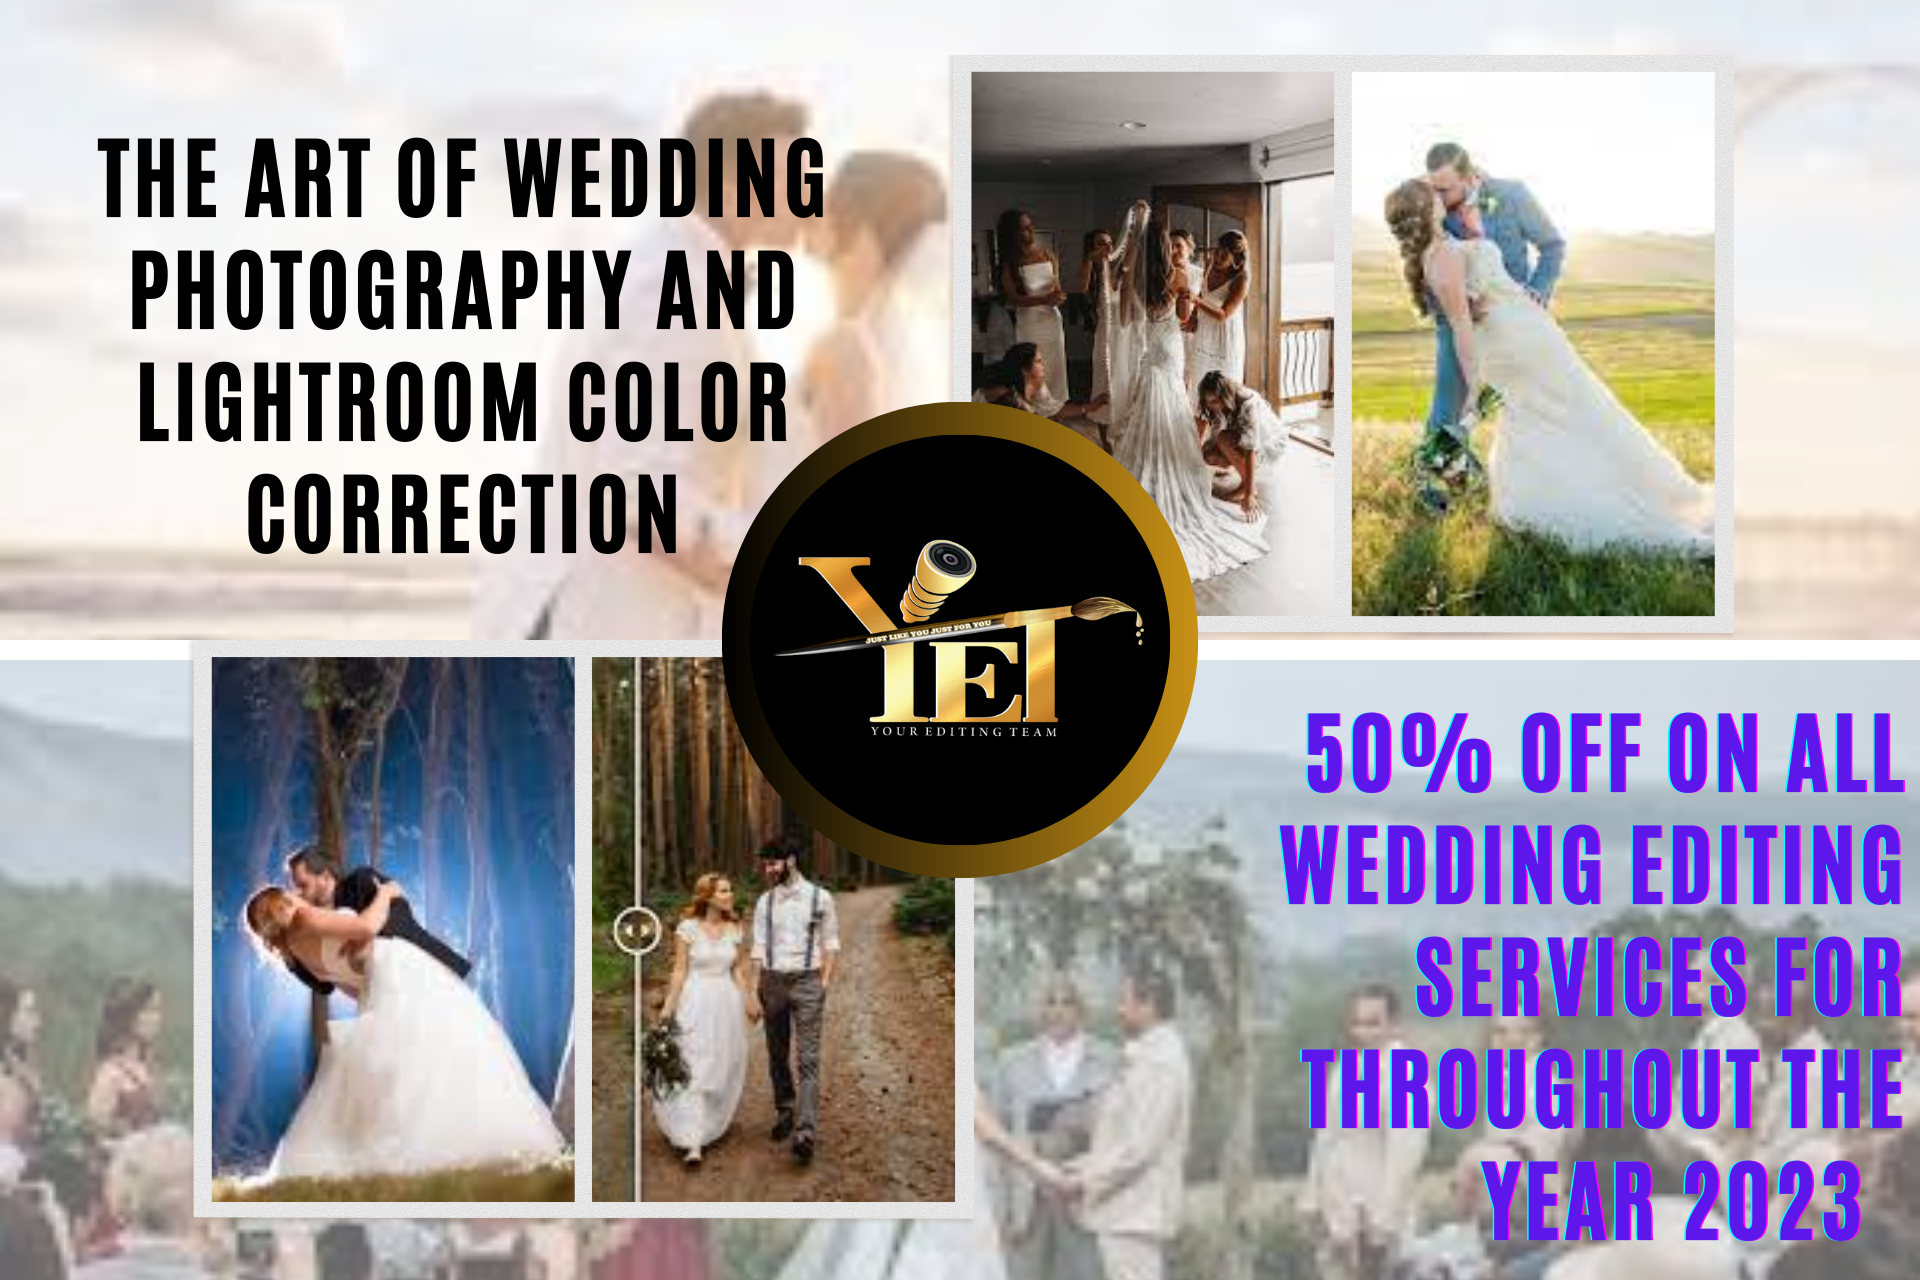 The Art Of Wedding Photography And Lightroom Color Correction